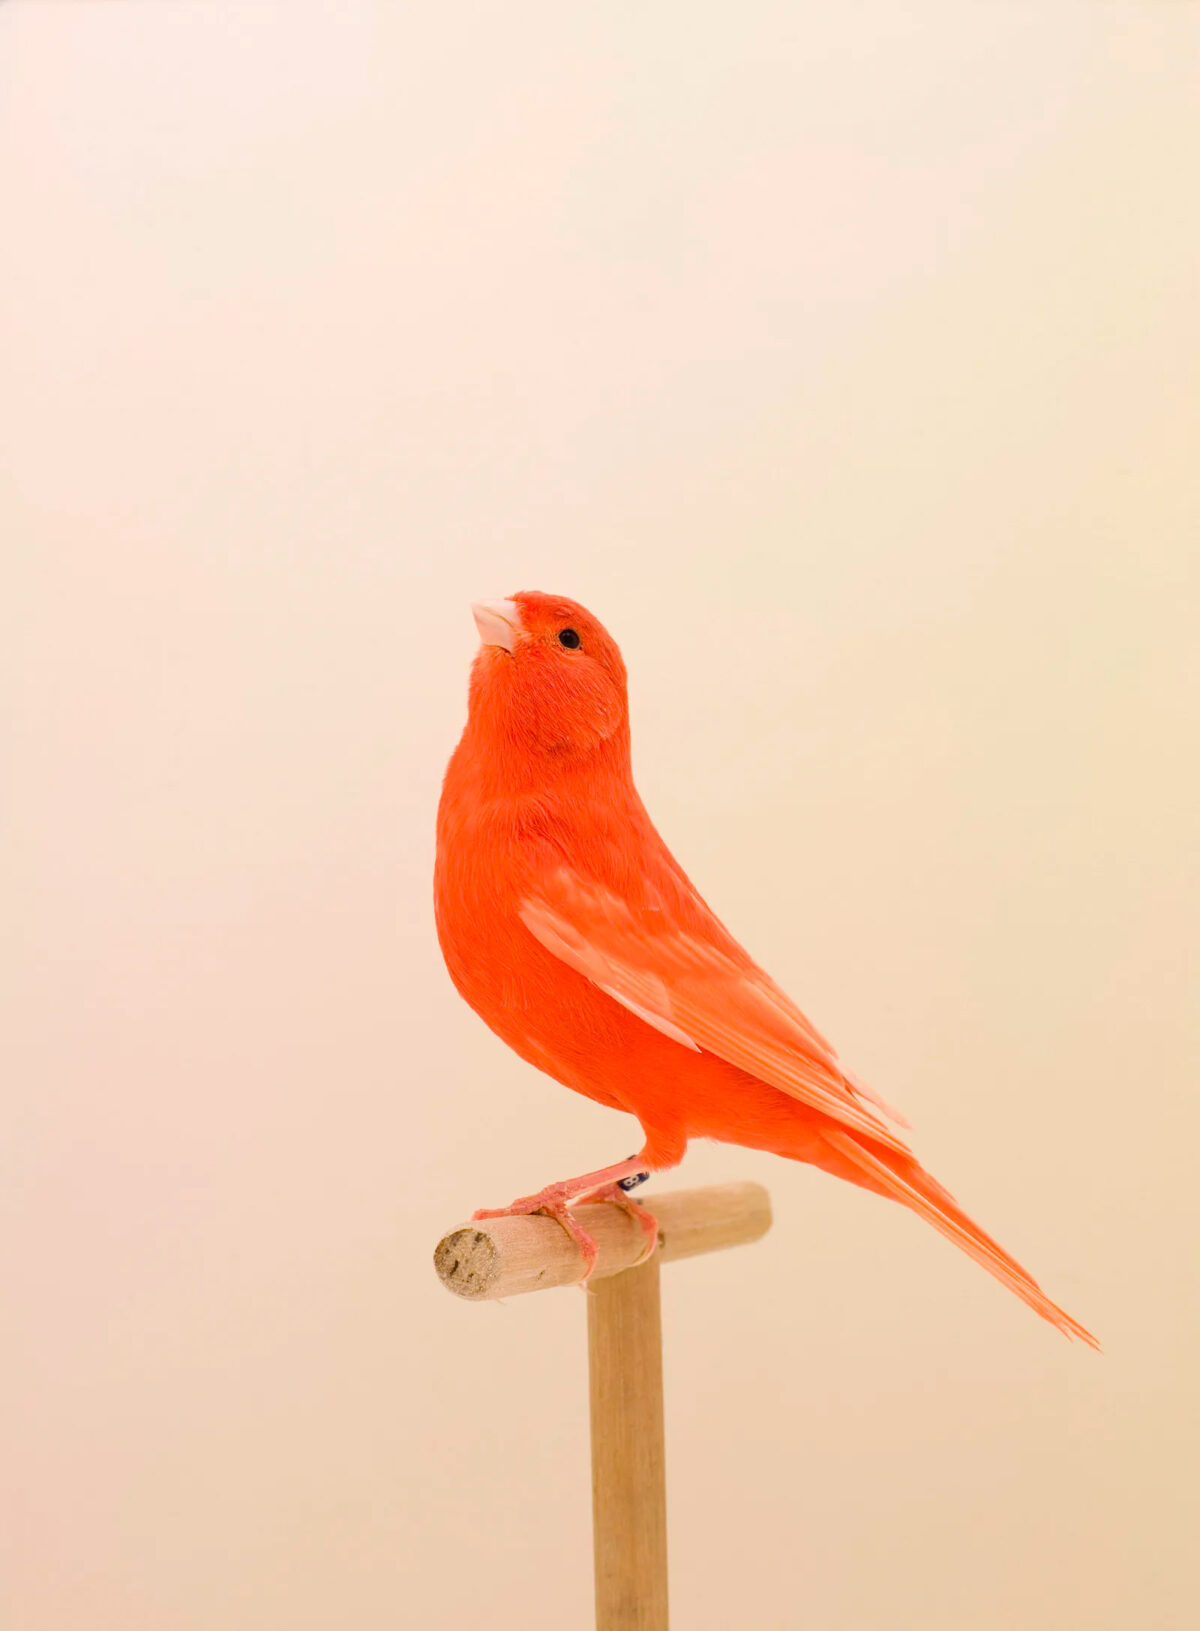 An Incomplete Dictionary Of Show Birds A Minimalist Bird Photography Series By Luke Stephenson (1)